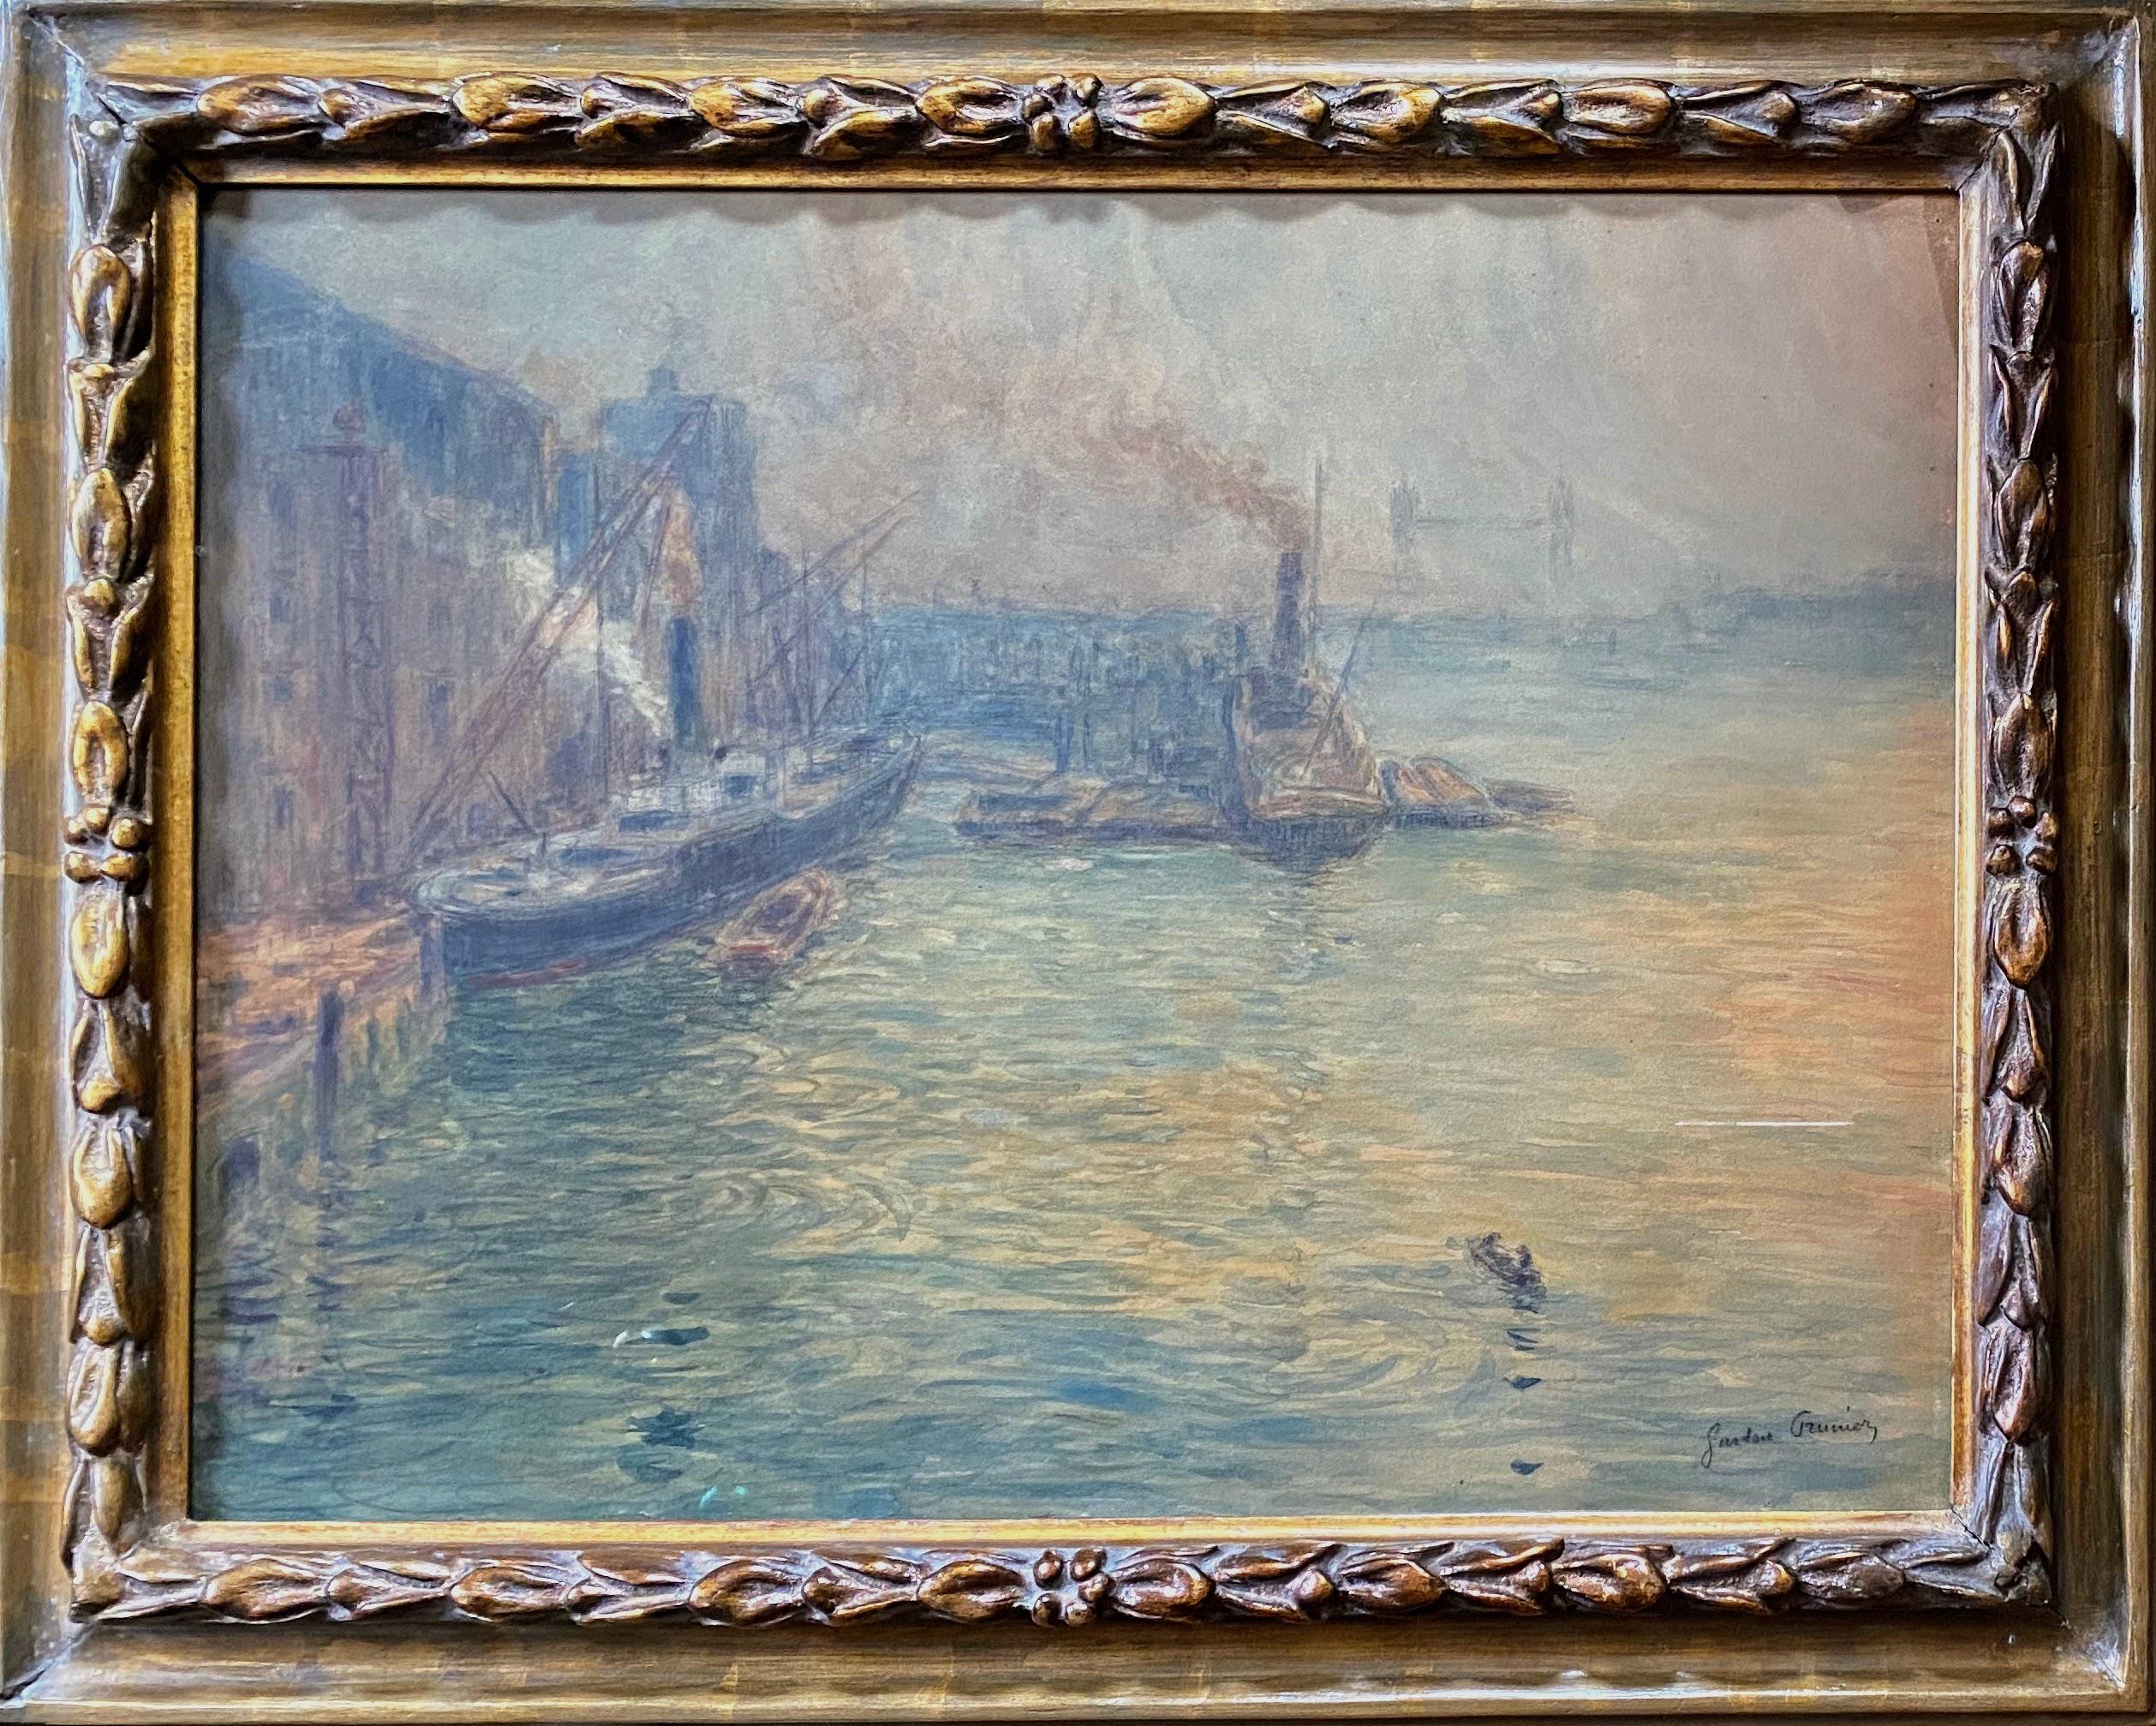 London Effect of Light and smoke on the Thames, Tower Bridge, 1907 Monet style